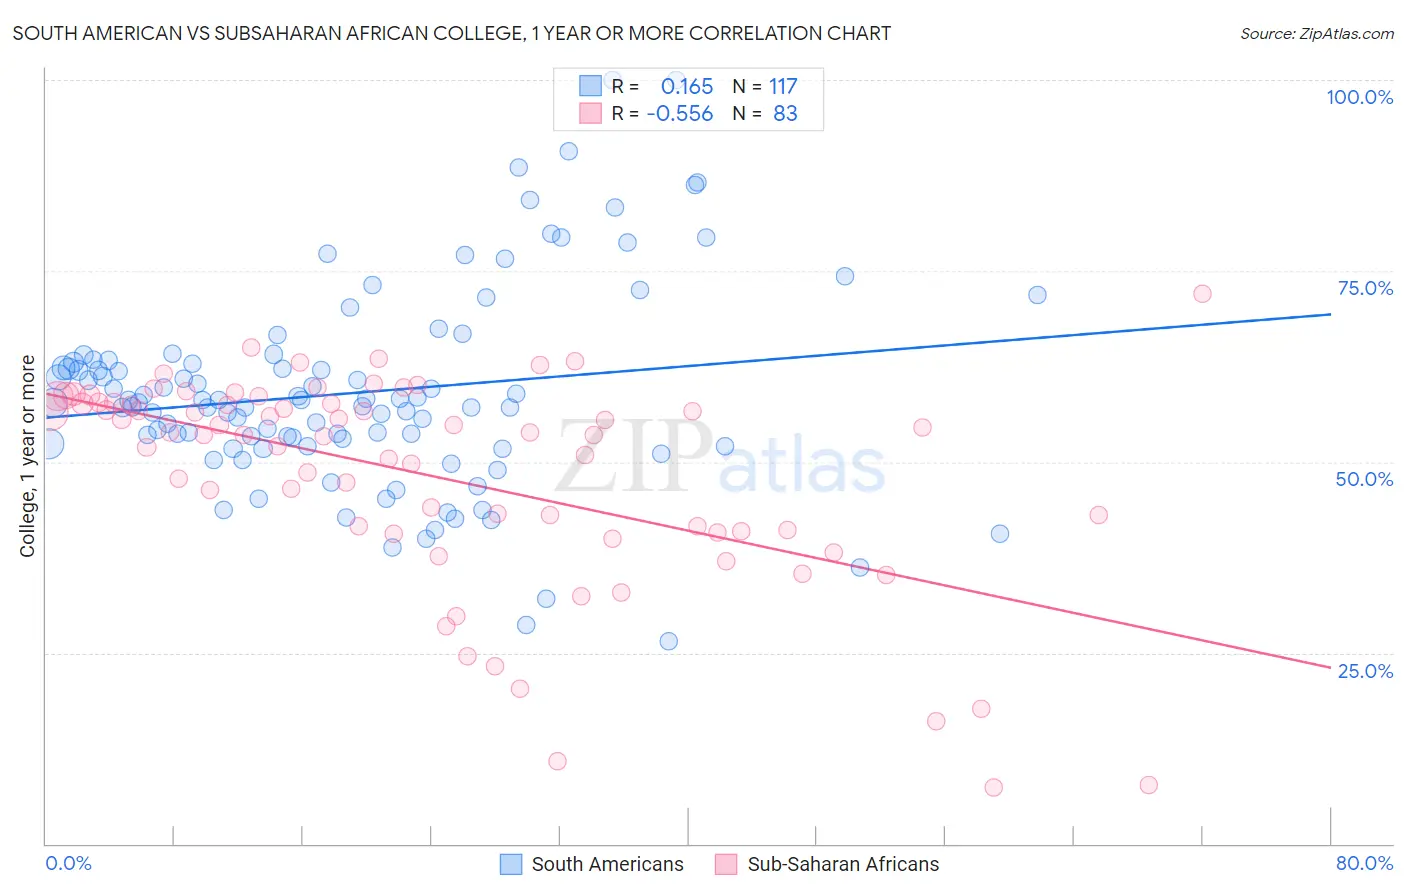 South American vs Subsaharan African College, 1 year or more